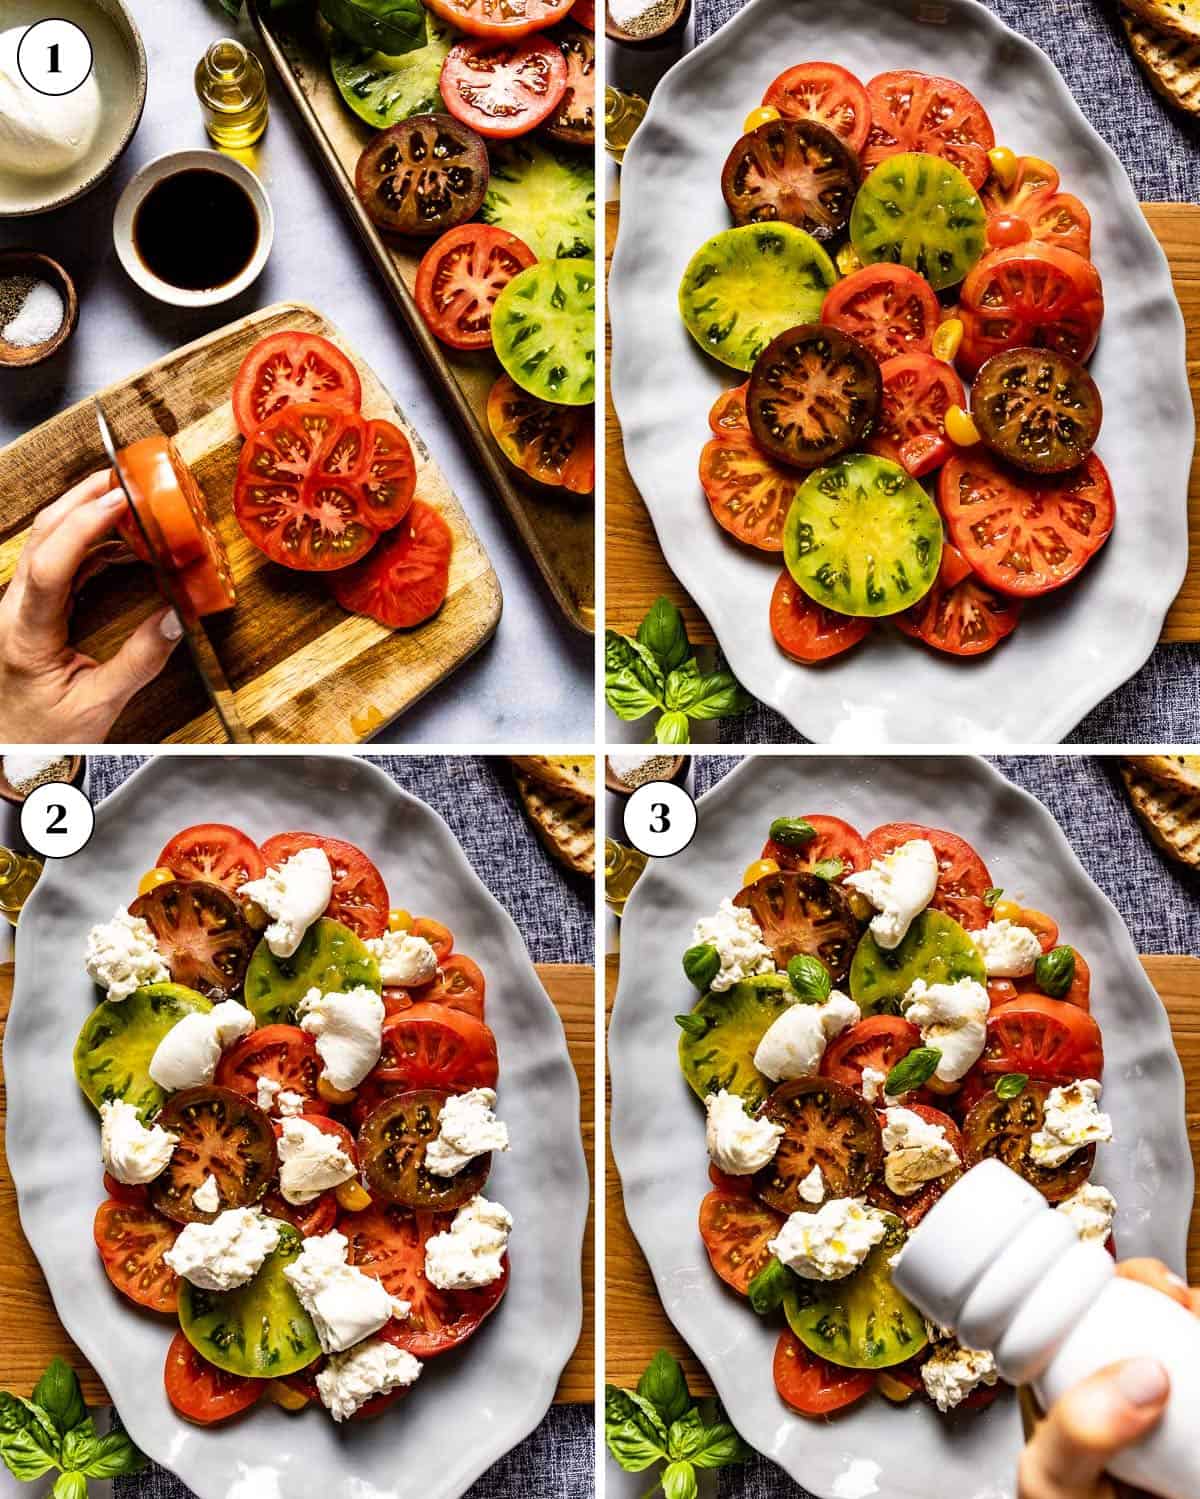 A collage of images showing how to make burrata Caprese recipe.